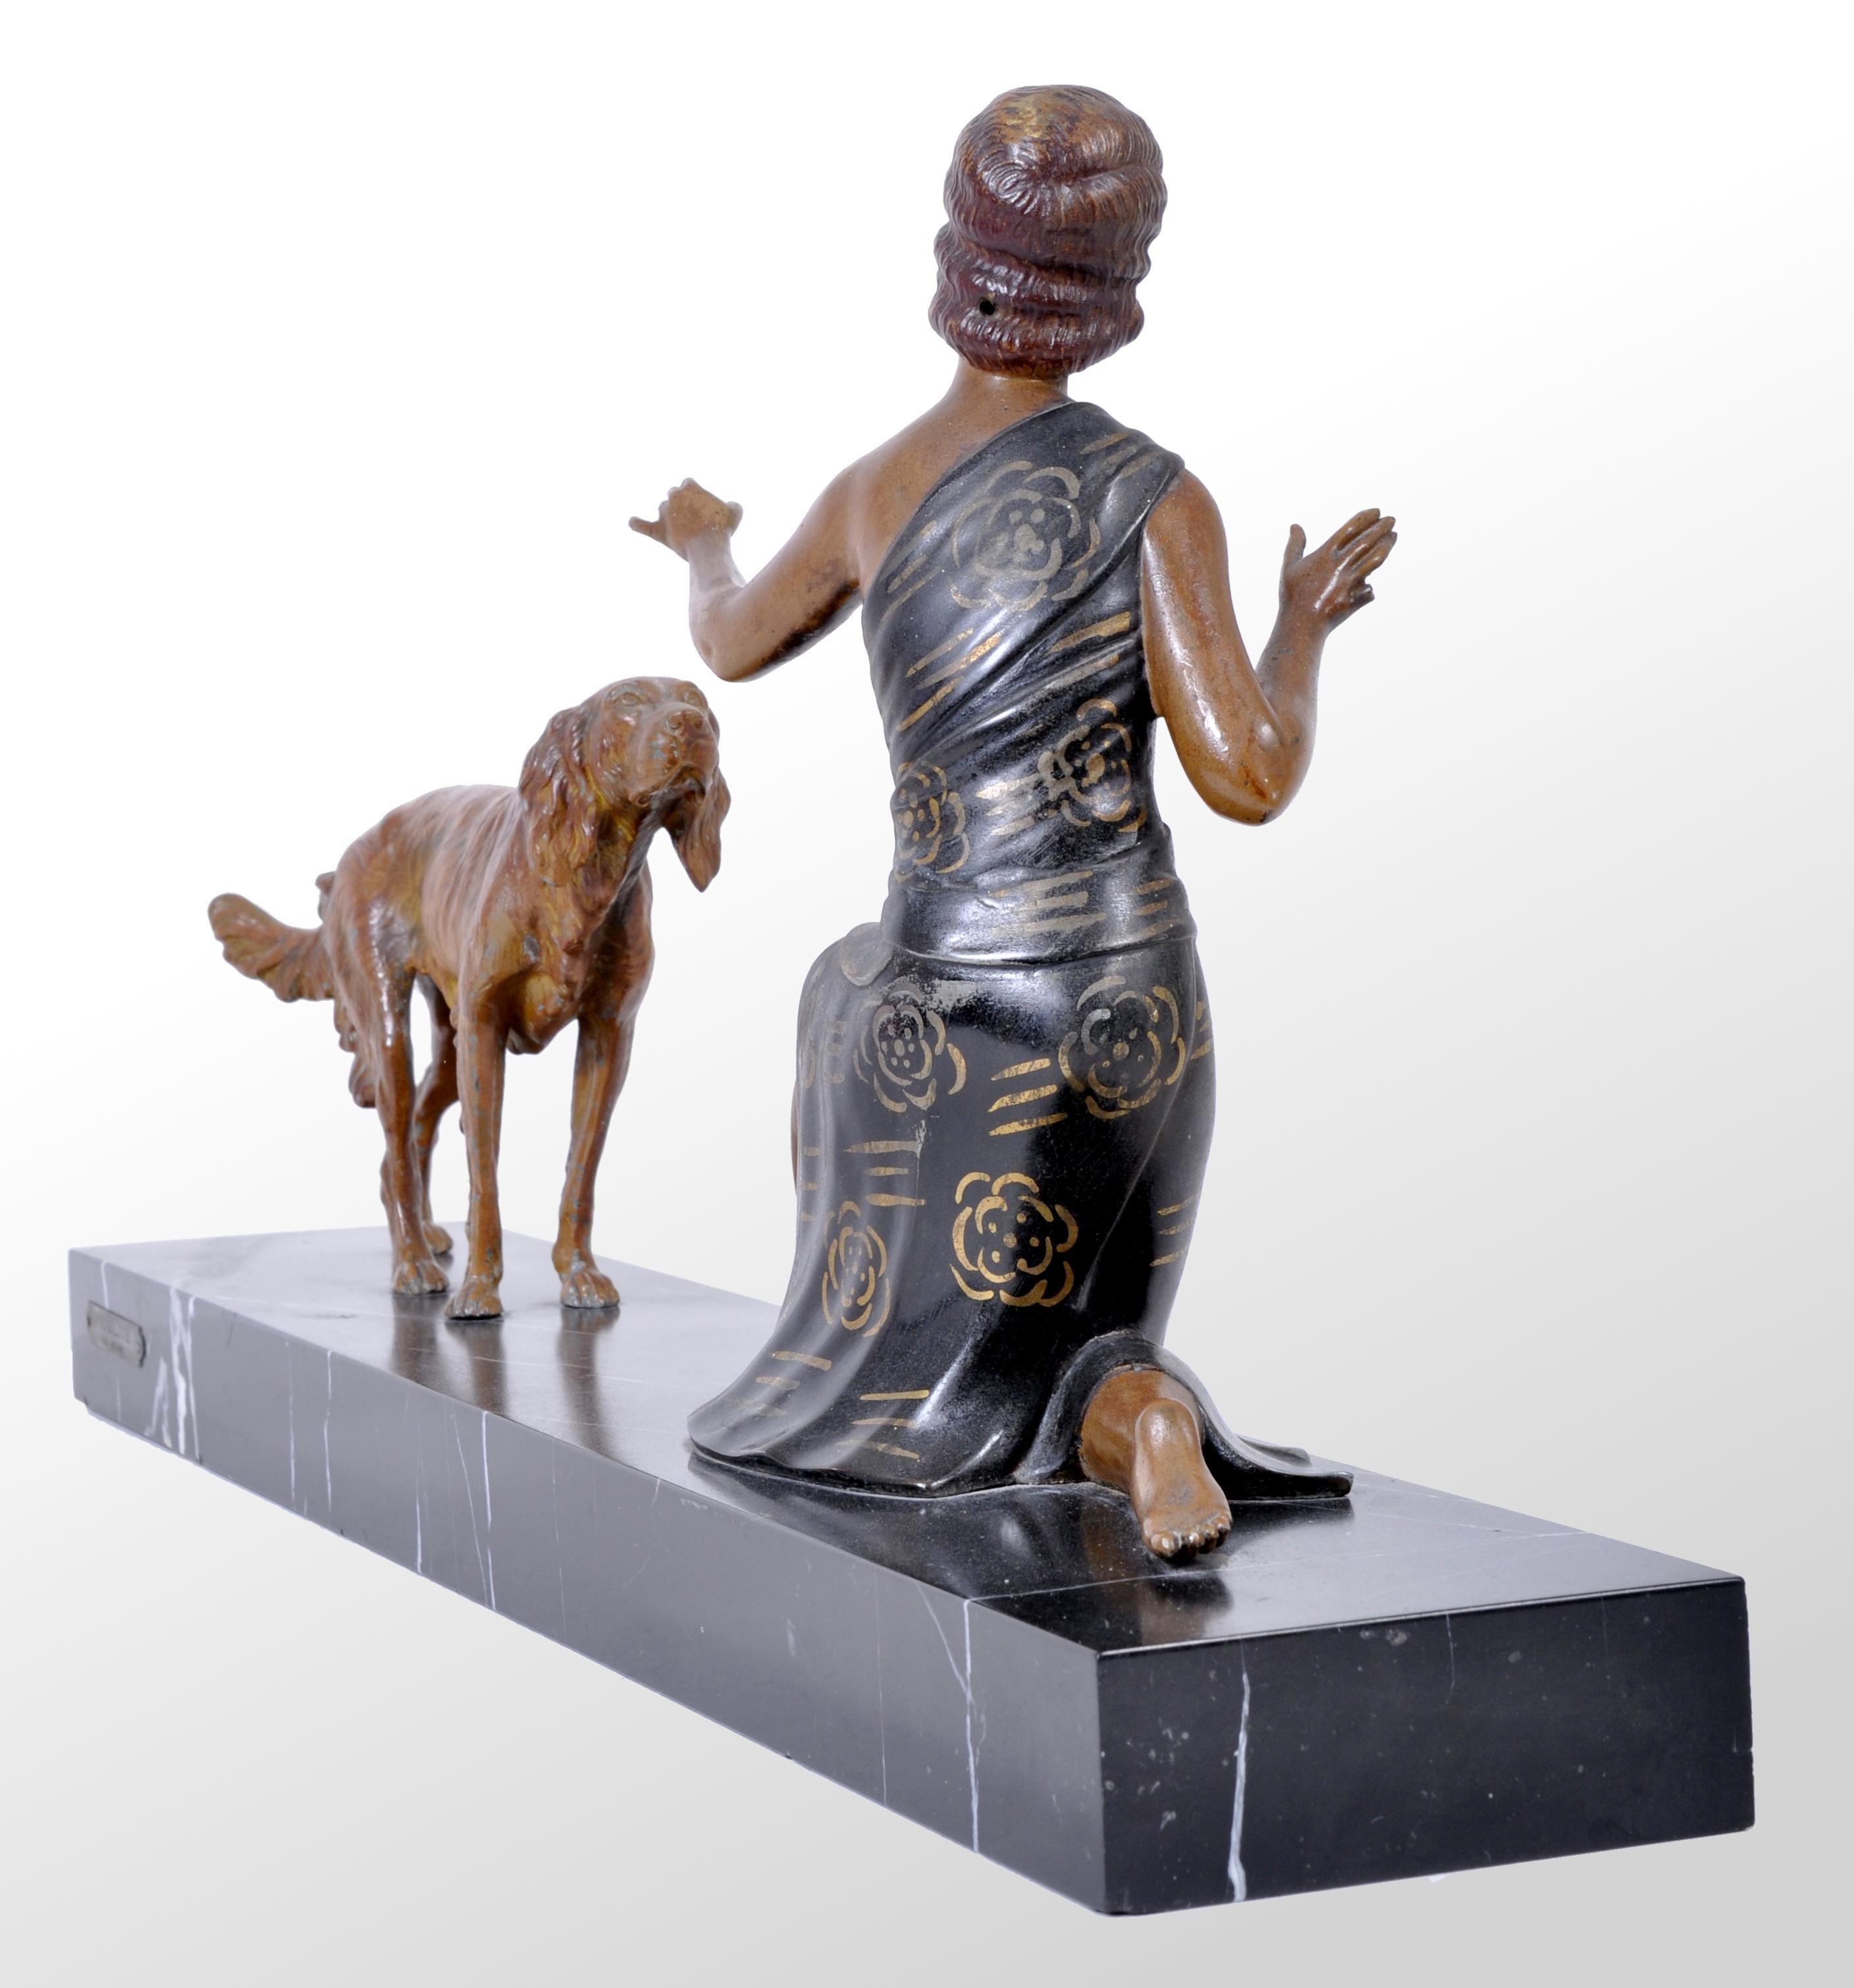 An original Art Deco Bronze / Spelter Figural Group by Enrique Molins-Balleste, circa 1930. A great bronze portraying a stylish Art Deco lady from the age of Jazz, with her hand outstretched to her faithful hound. The bronze mounted on a black